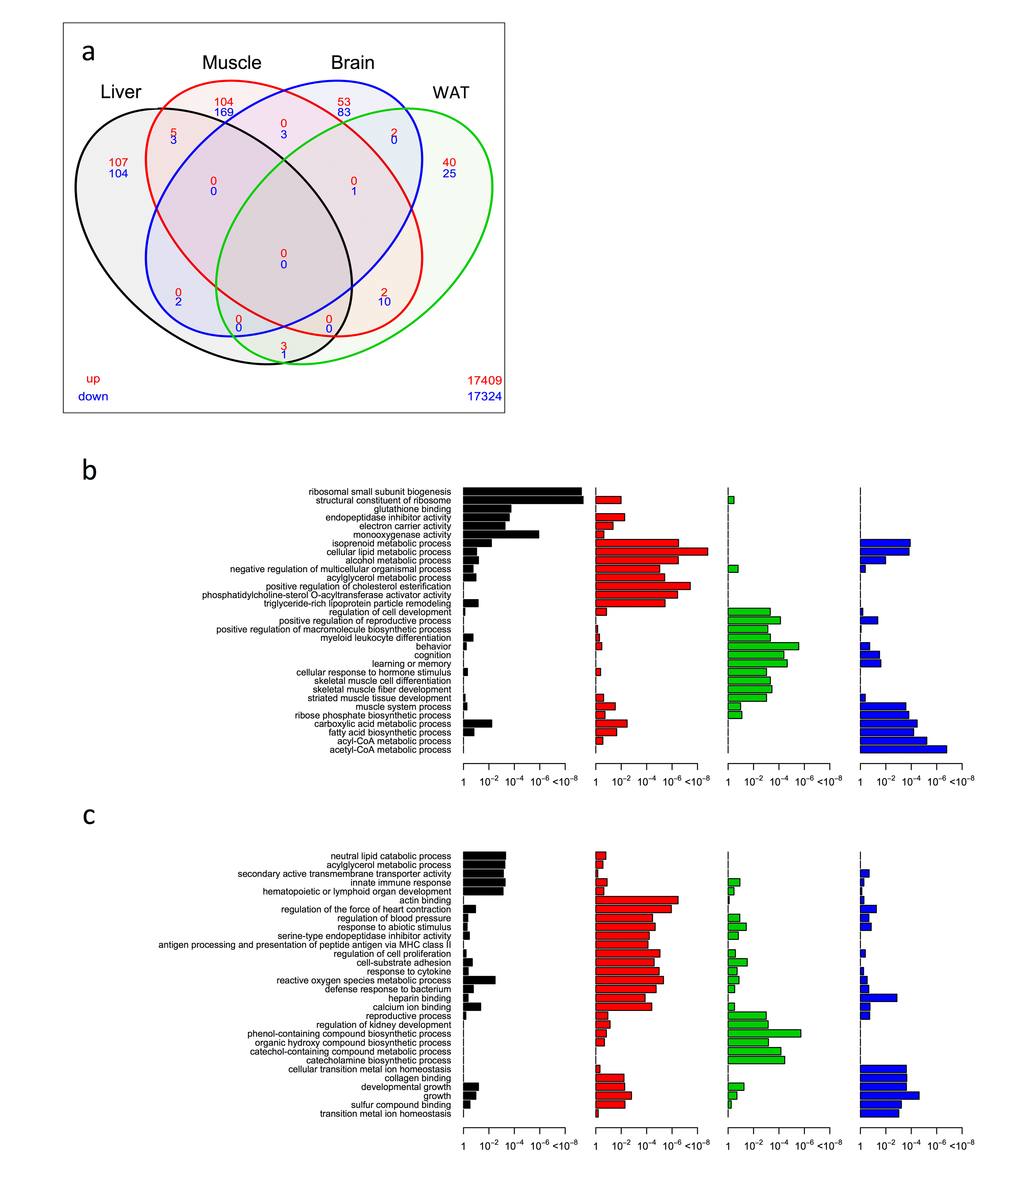 Shared and distinct gene expression profile among four tissues in WTDR mice. (a) Venn diagram of similar expressed genes across liver, skeletal muscle, brain and WAT tissue in KOAL mice. Significantly up-regulated genes are shown in red and significantly down-regulated genes are shown in blue. Common genes that are significantly up- or down-regulated are found in overlapping ovals. The numbers in the bottom far right denotes the number of genes expressed but not significantly up-regulated (red) or down-regulated (blue). (b) Up-regulated gene ontology (GO) terms in liver, skeletal muscle, brain and WAT of KOAL mice. (c) Down-regulated GO terms in liver, skeletal muscle, brain and WAT of KOAL mice.